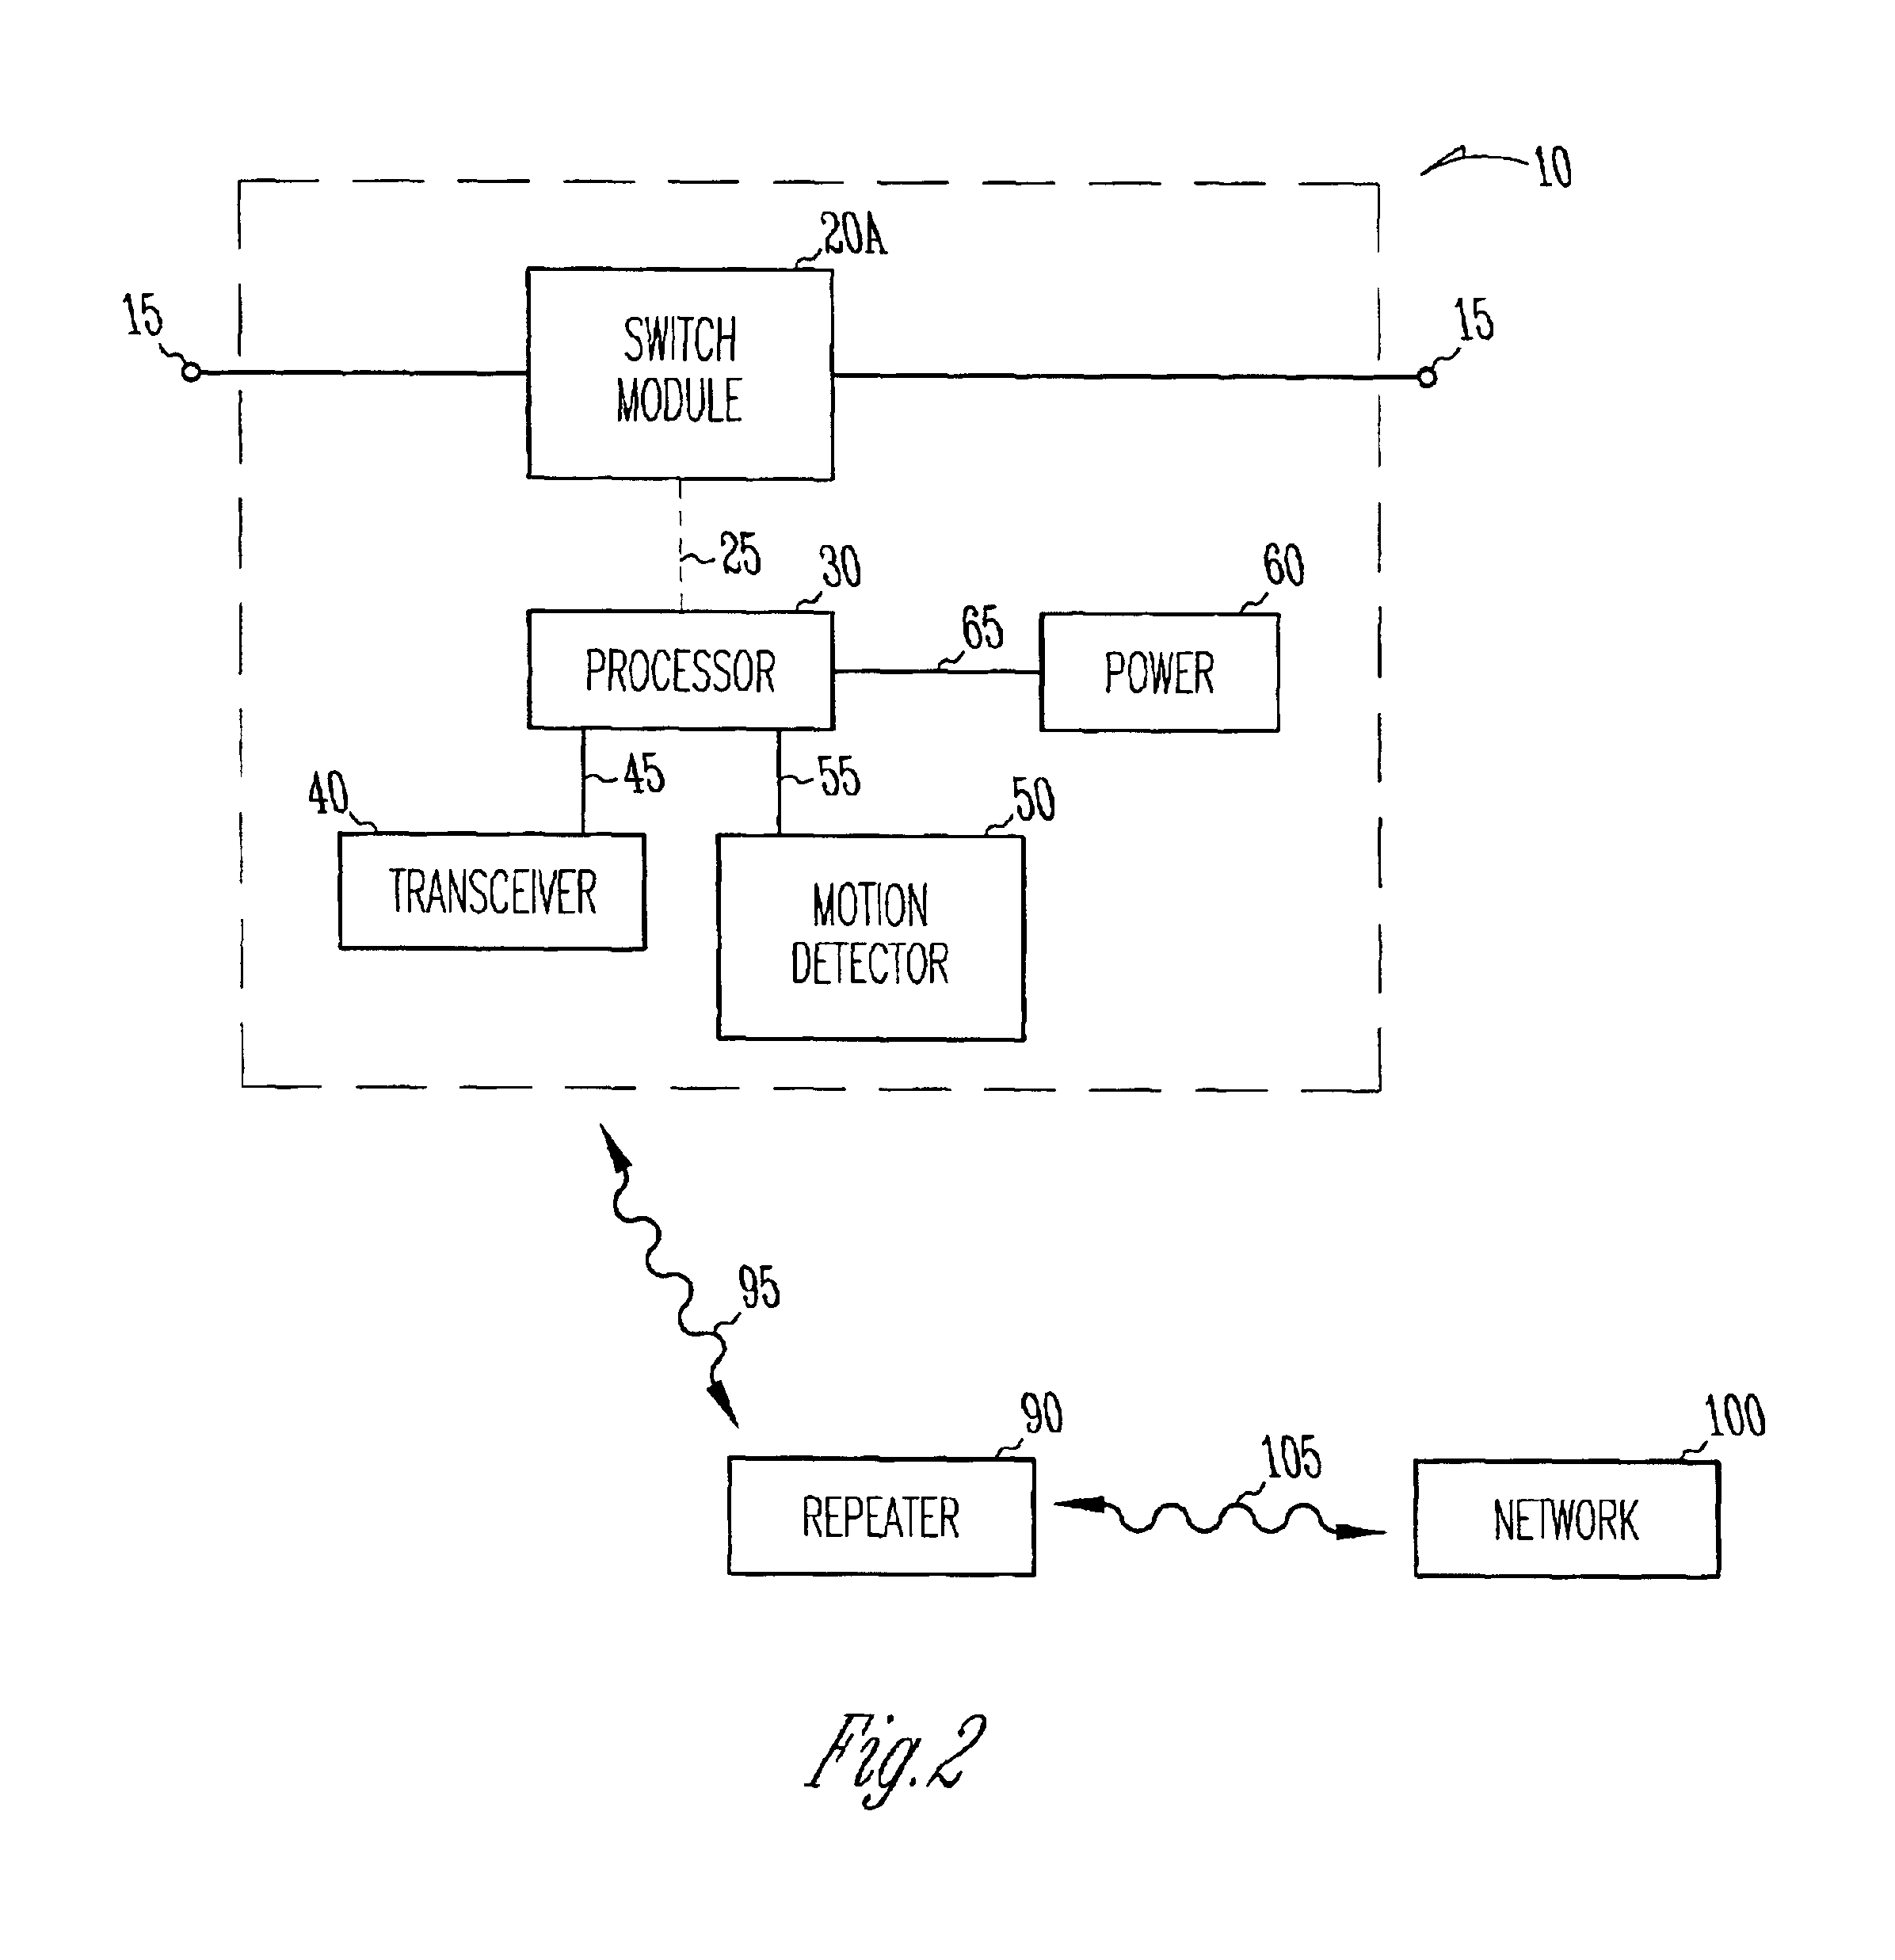 Electrical power control and sensor module for a wireless system